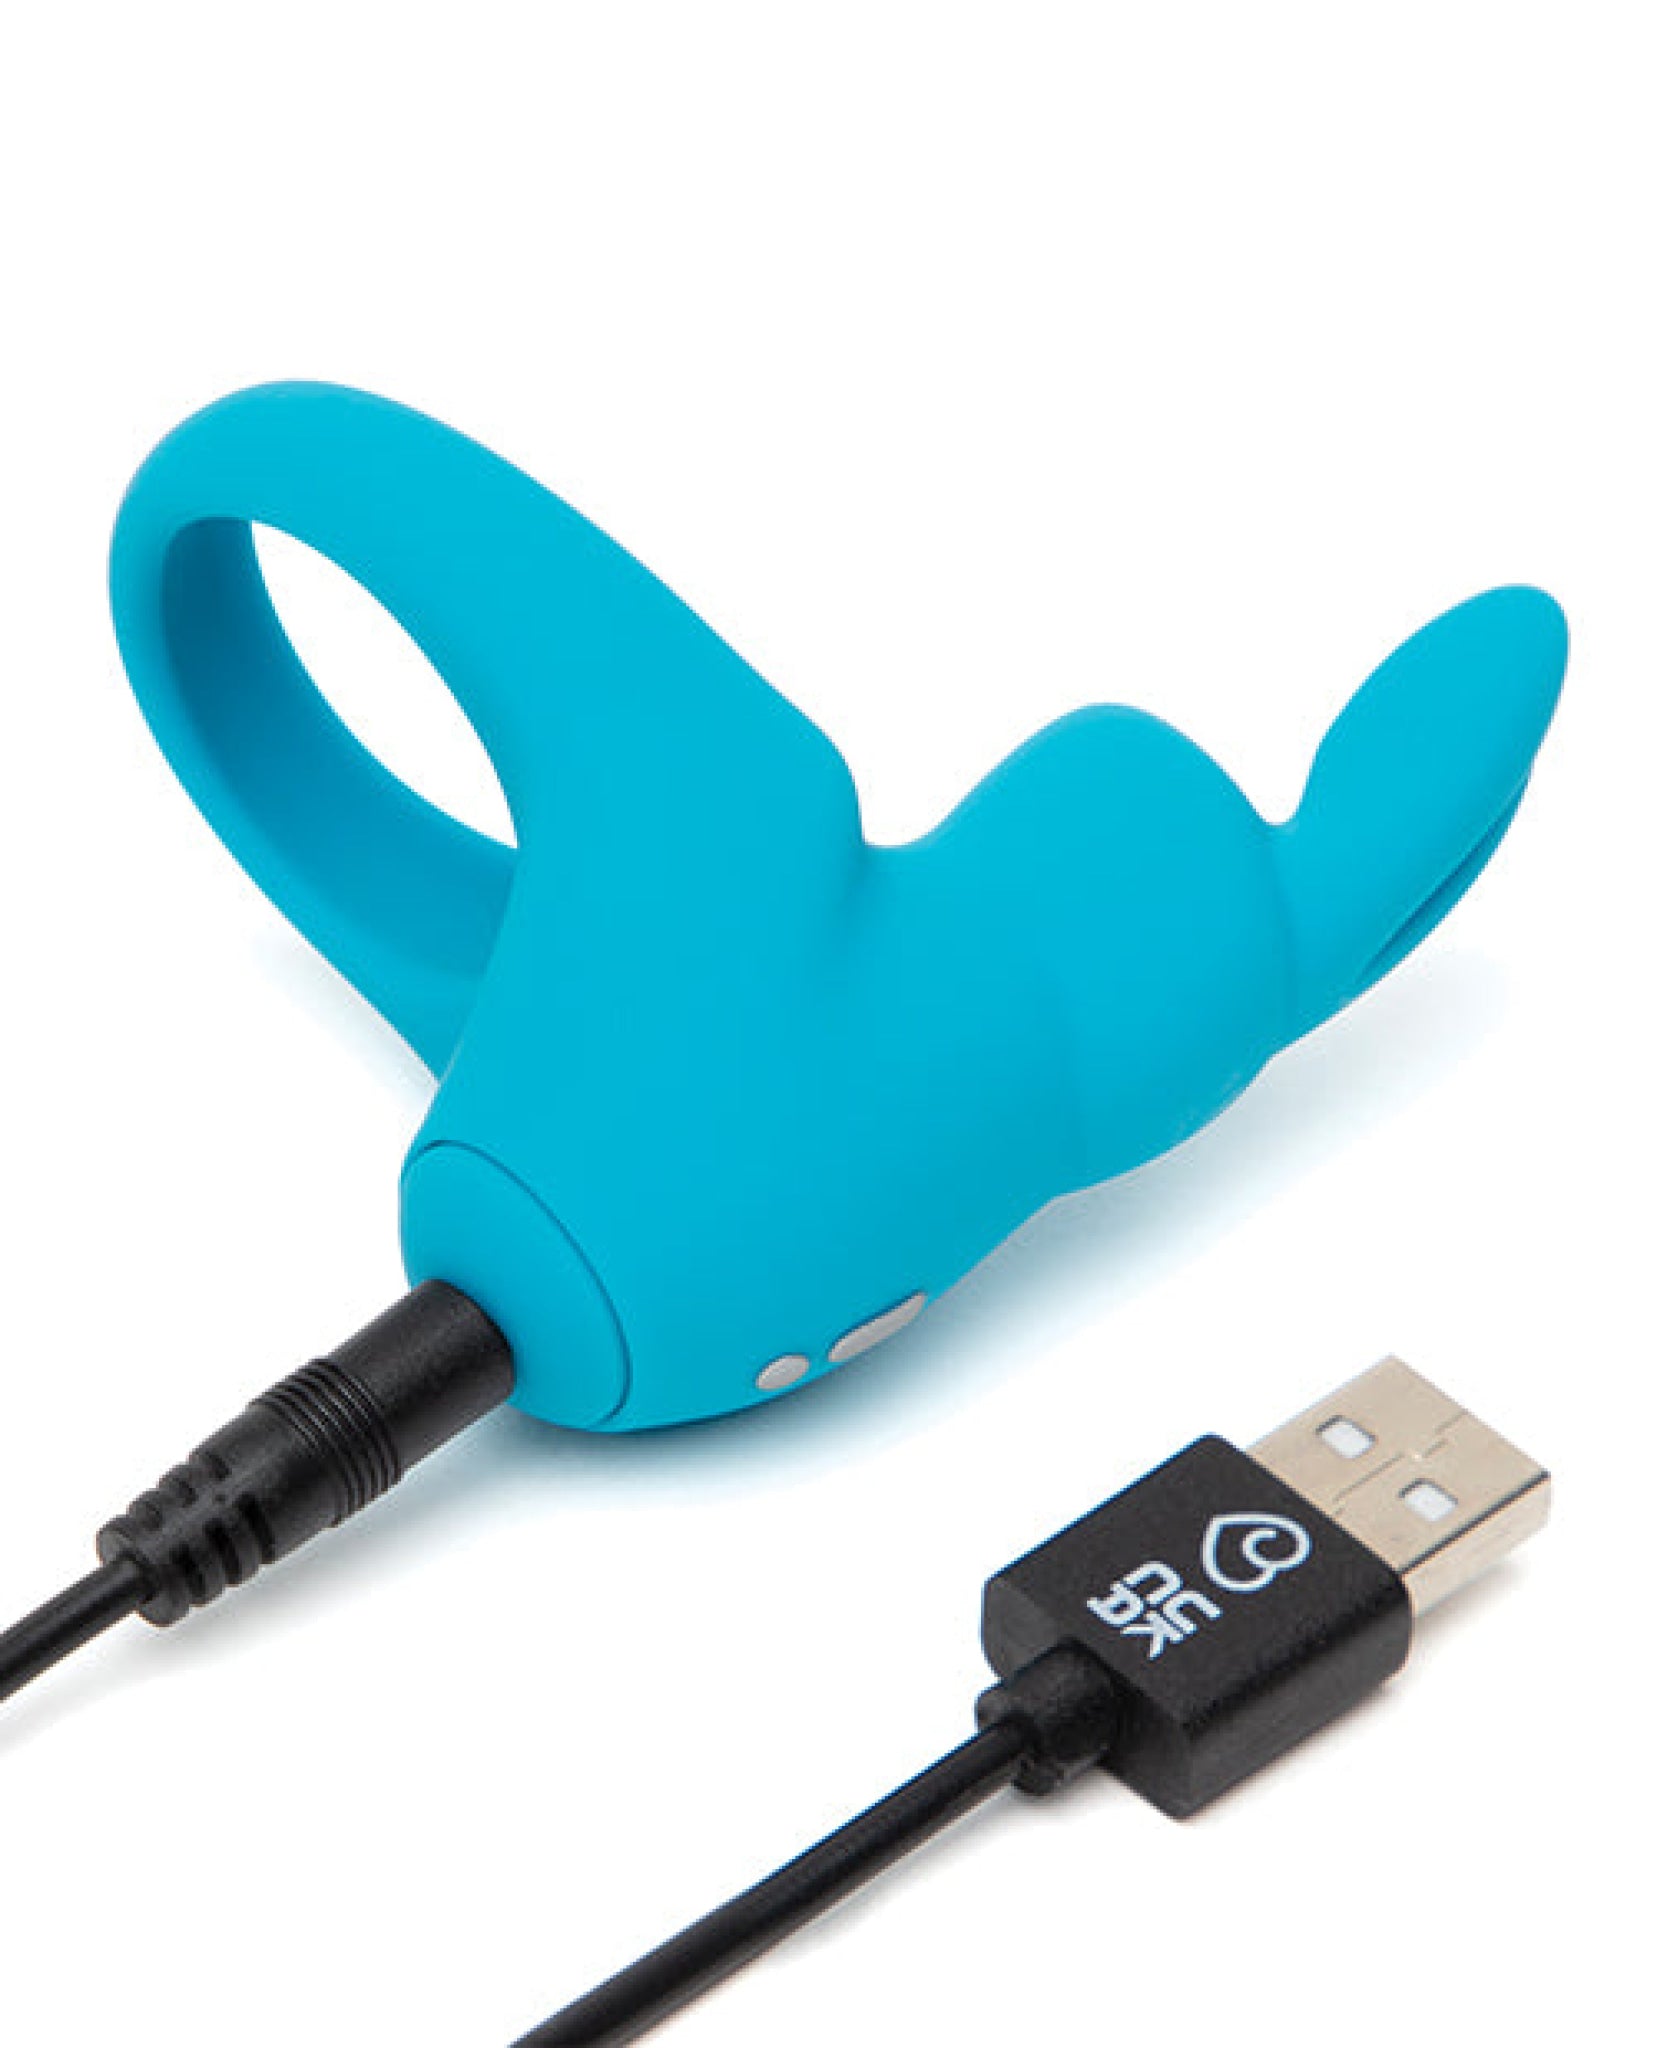 Happy Rabbit Rechargeable Cock Ring Lovehoney C/o Wow Tech